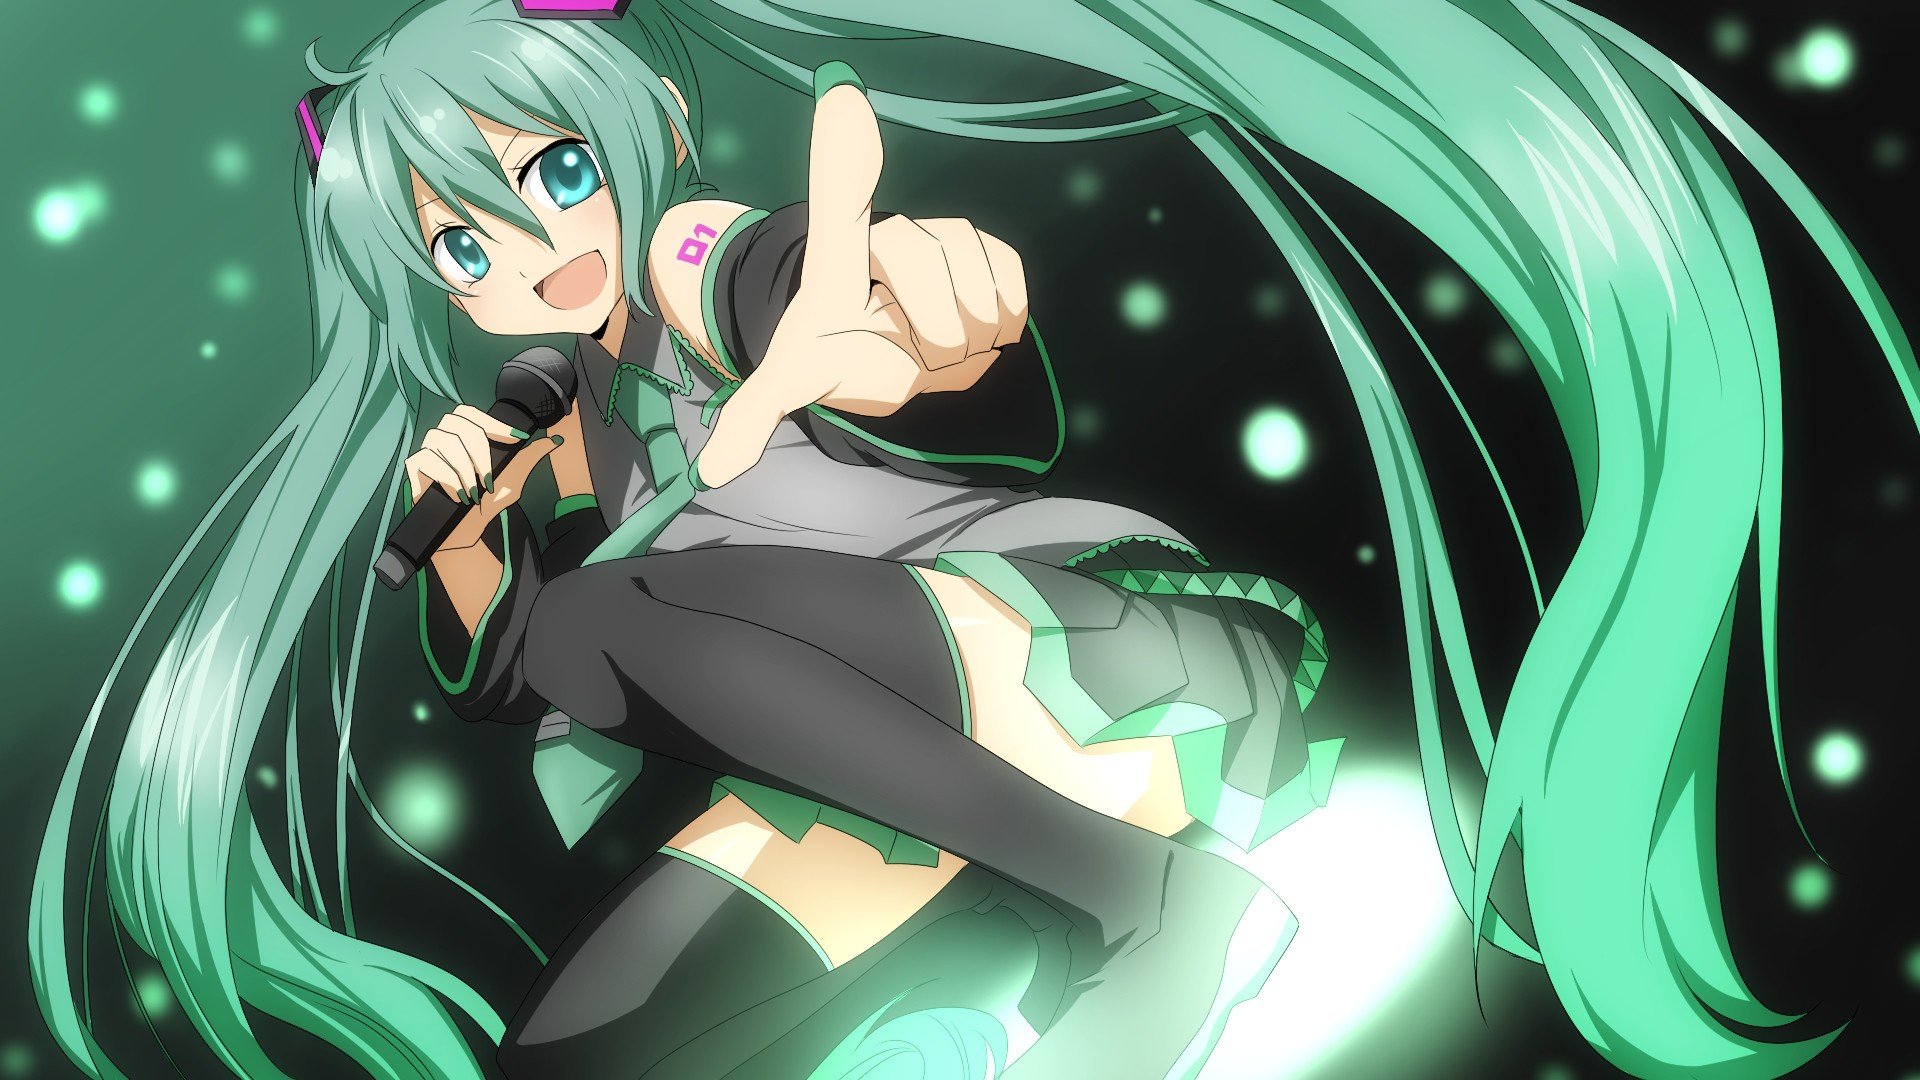 tattoos vocaloid hatsune miku green eyes green hair anime anime girls microphones wallpapers hd desktop and mobile backgrounds wallup net